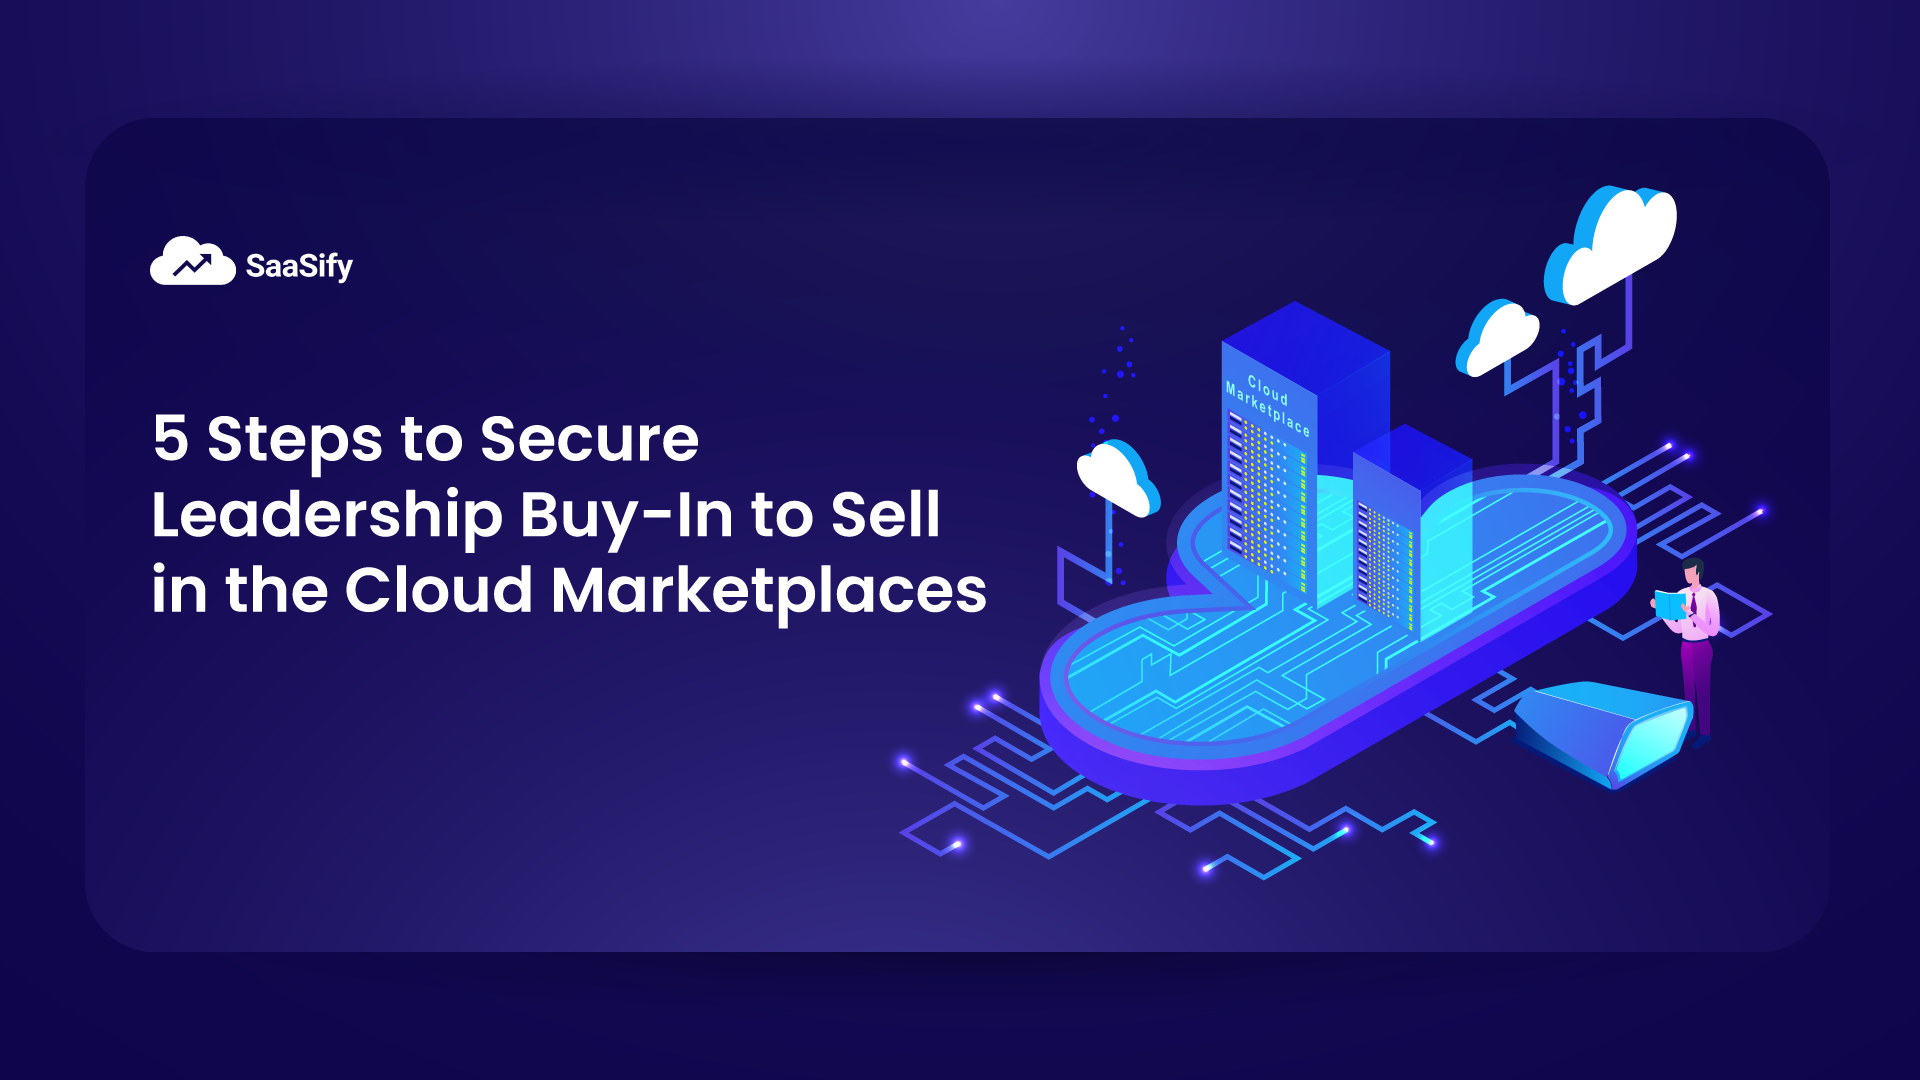 Sell in the Cloud Marketplaces: 5 Steps to Secure Leadership Buy-In